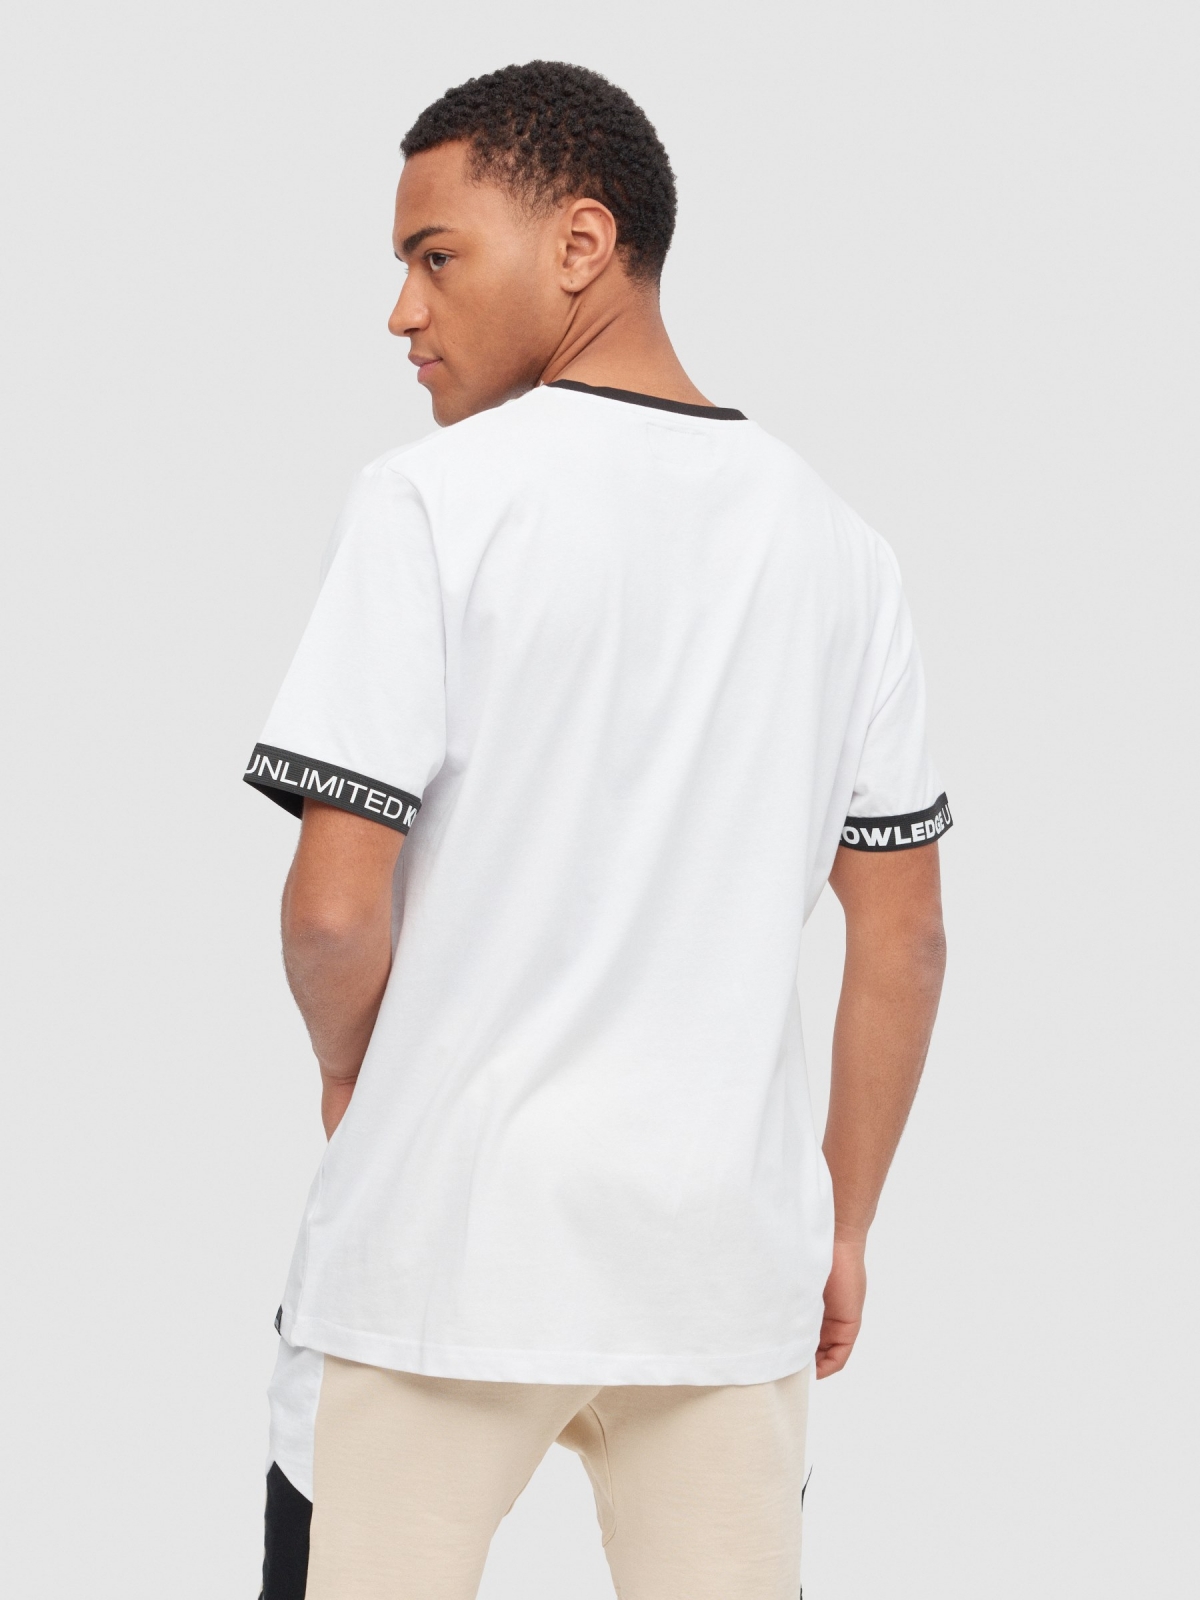 Contrast sleeve sports t-shirt white middle back view